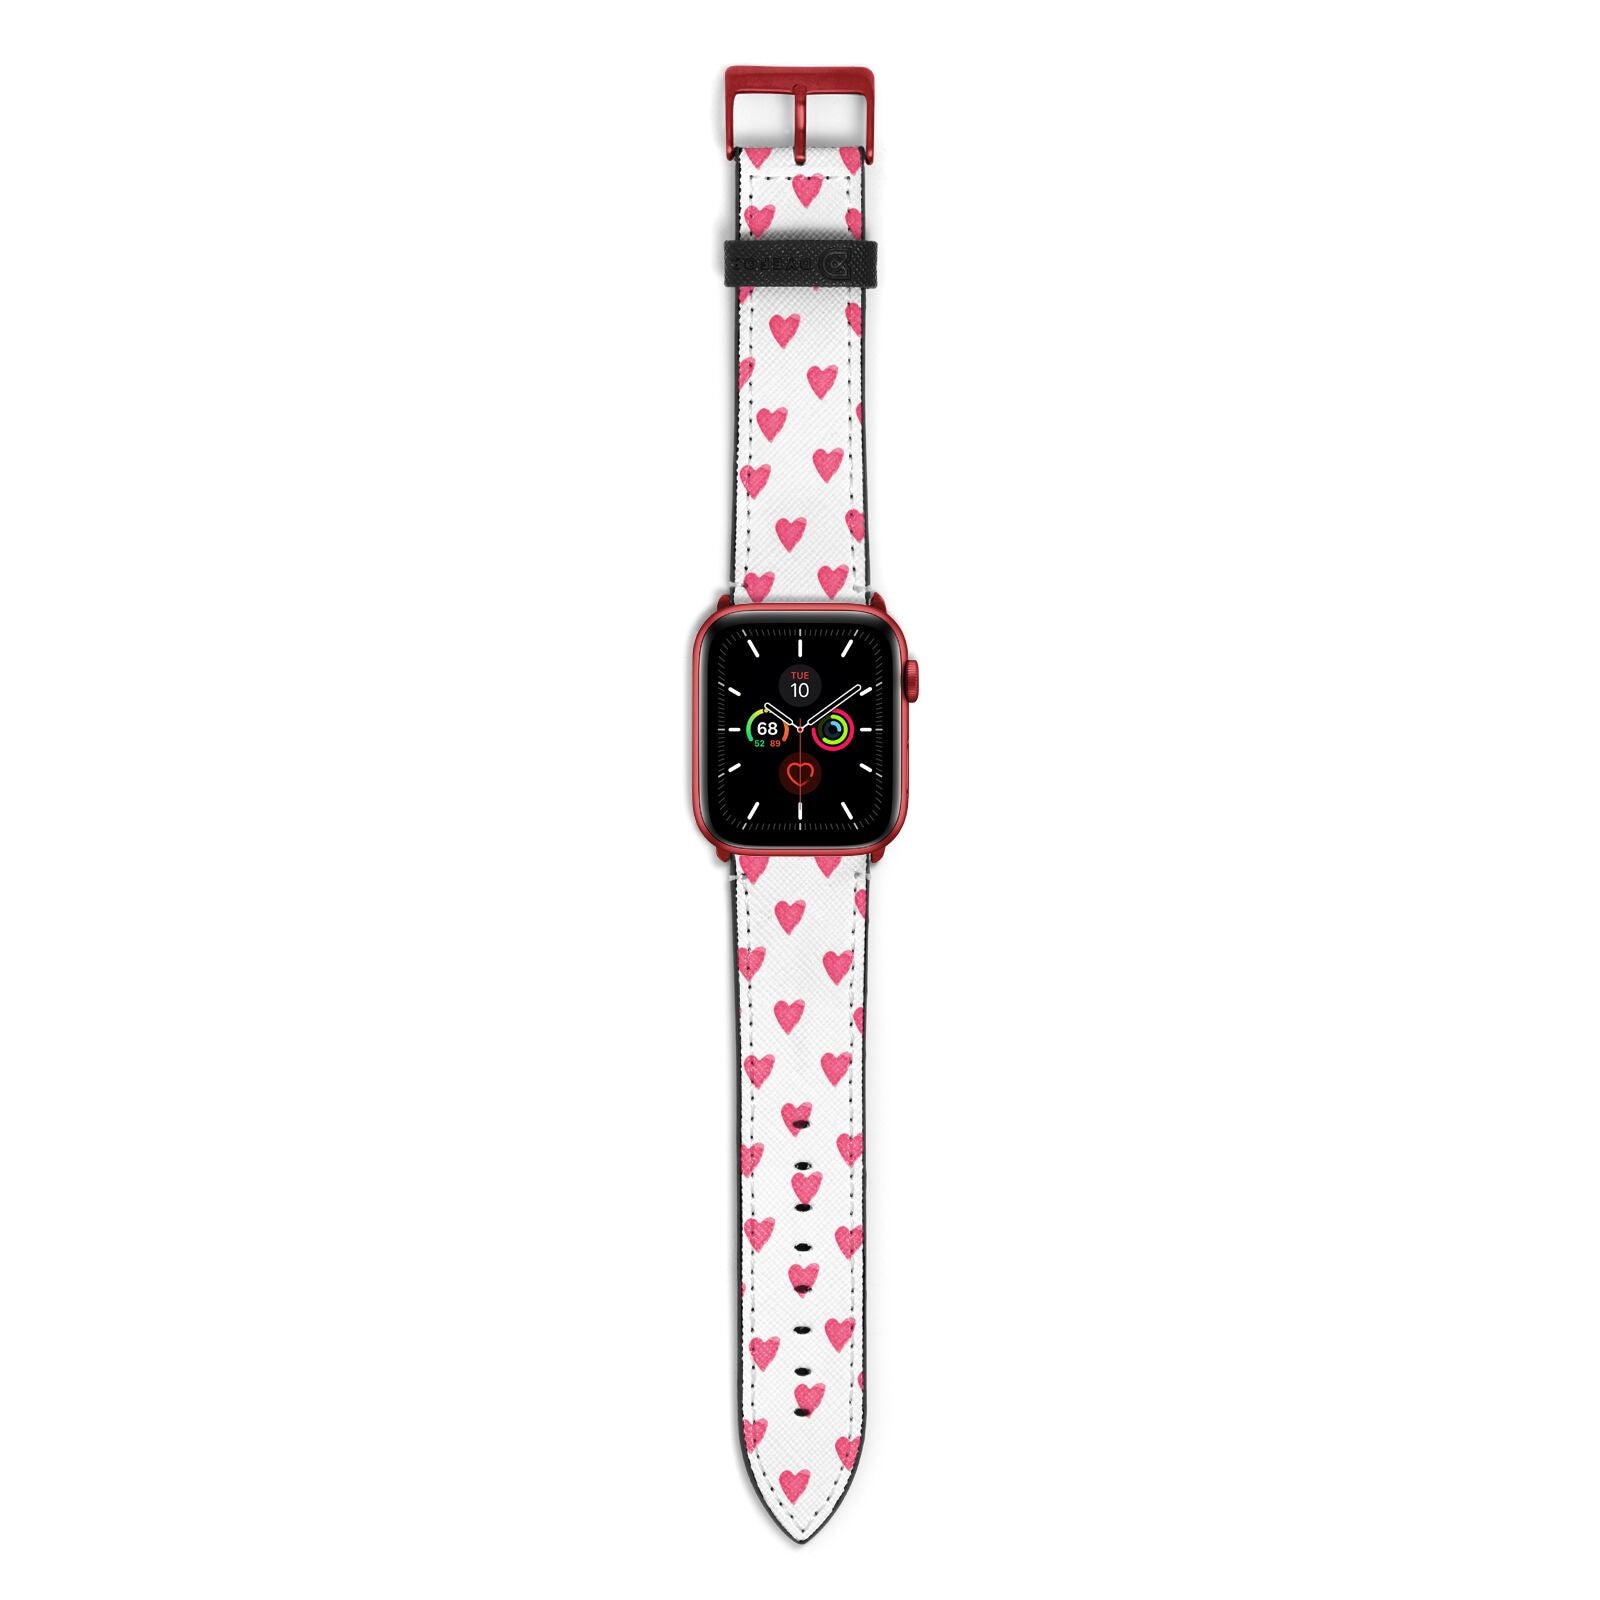 Heart Patterned Apple Watch Strap with Red Hardware